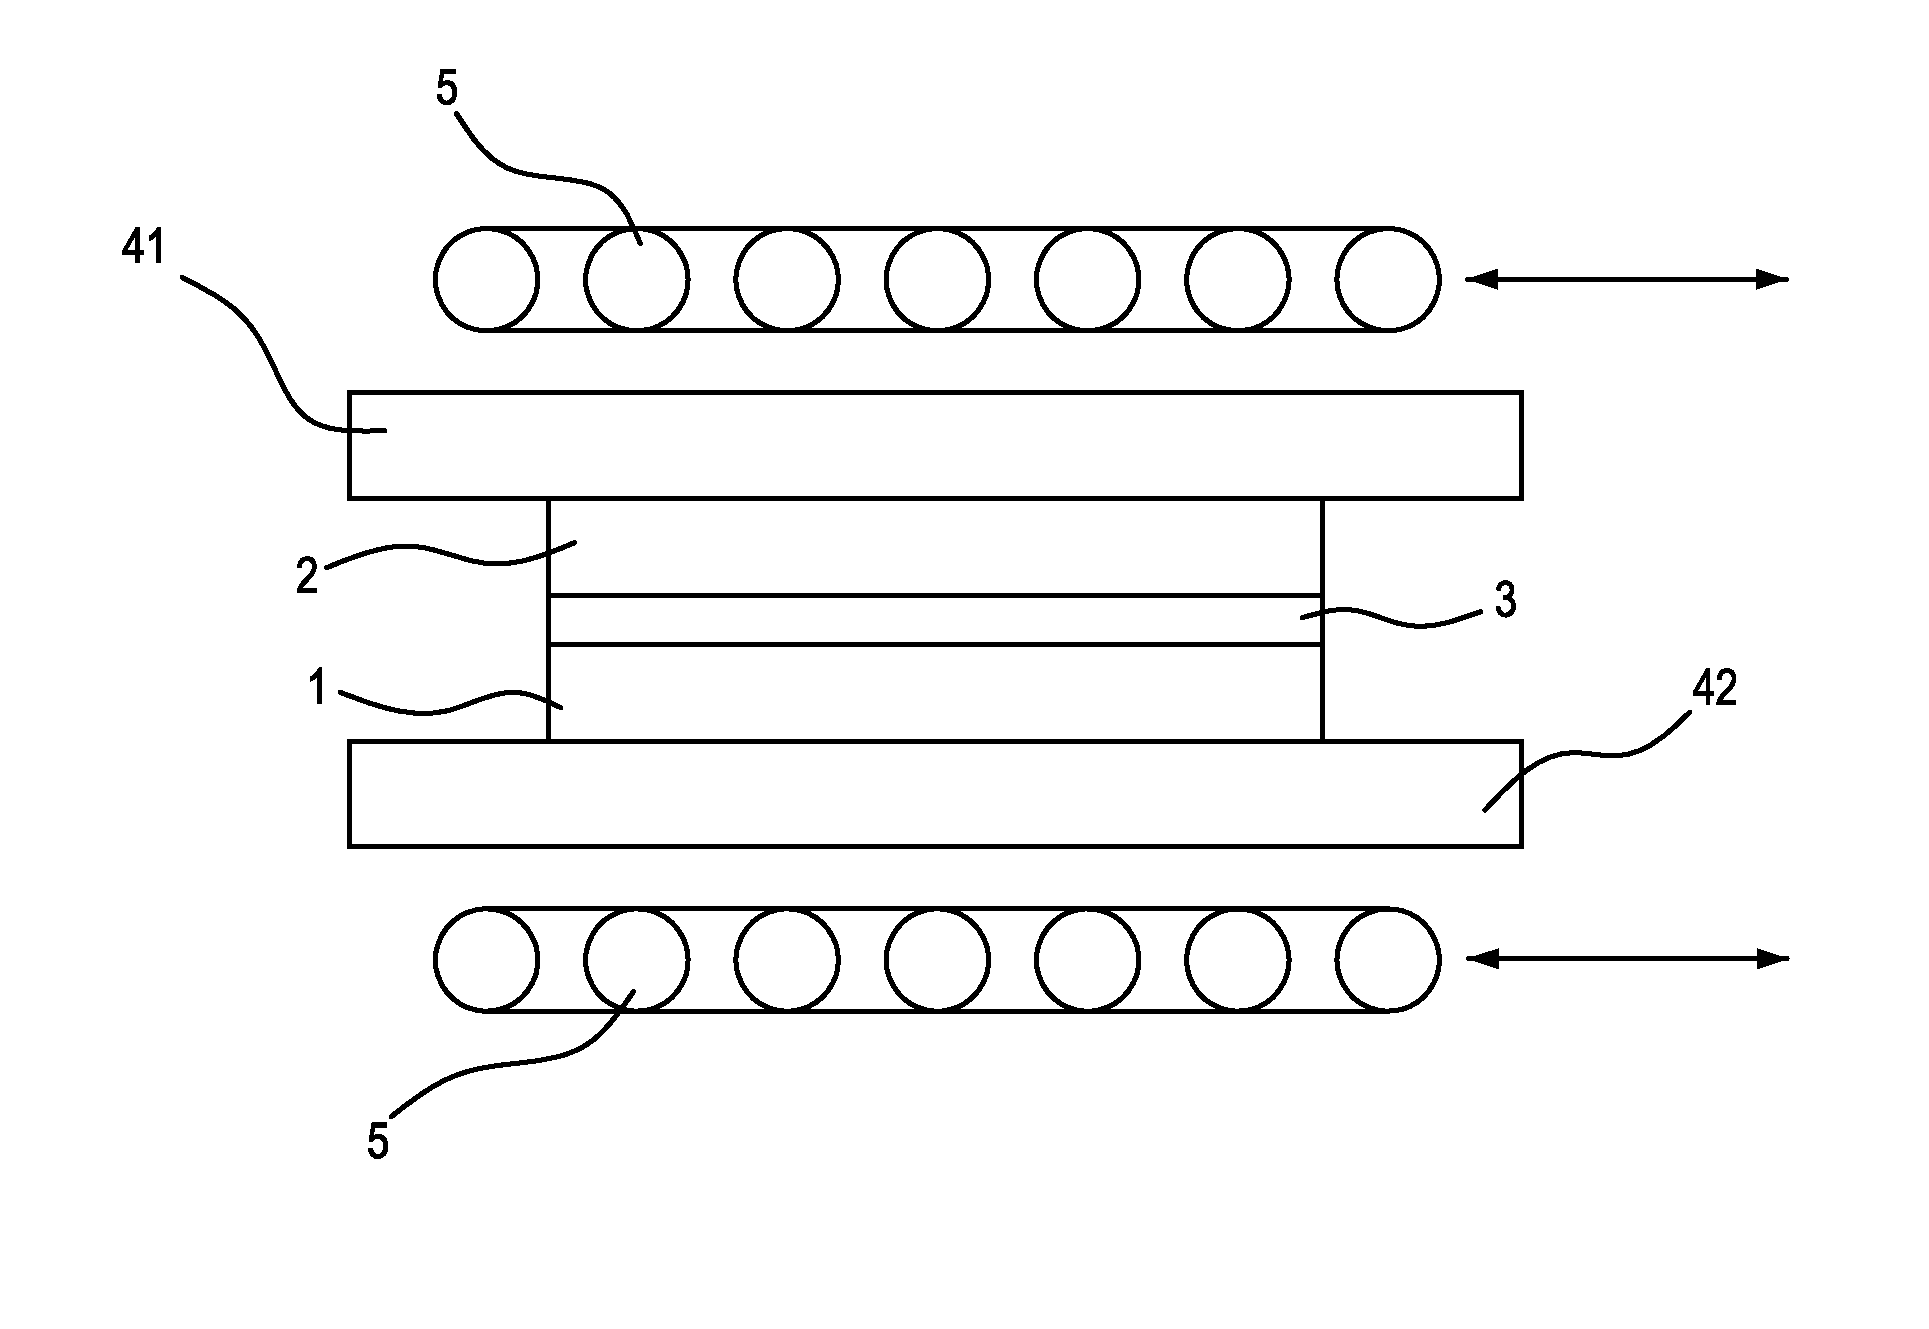 Fabrication method for enhancing the electrical conductivity of bipolar plates